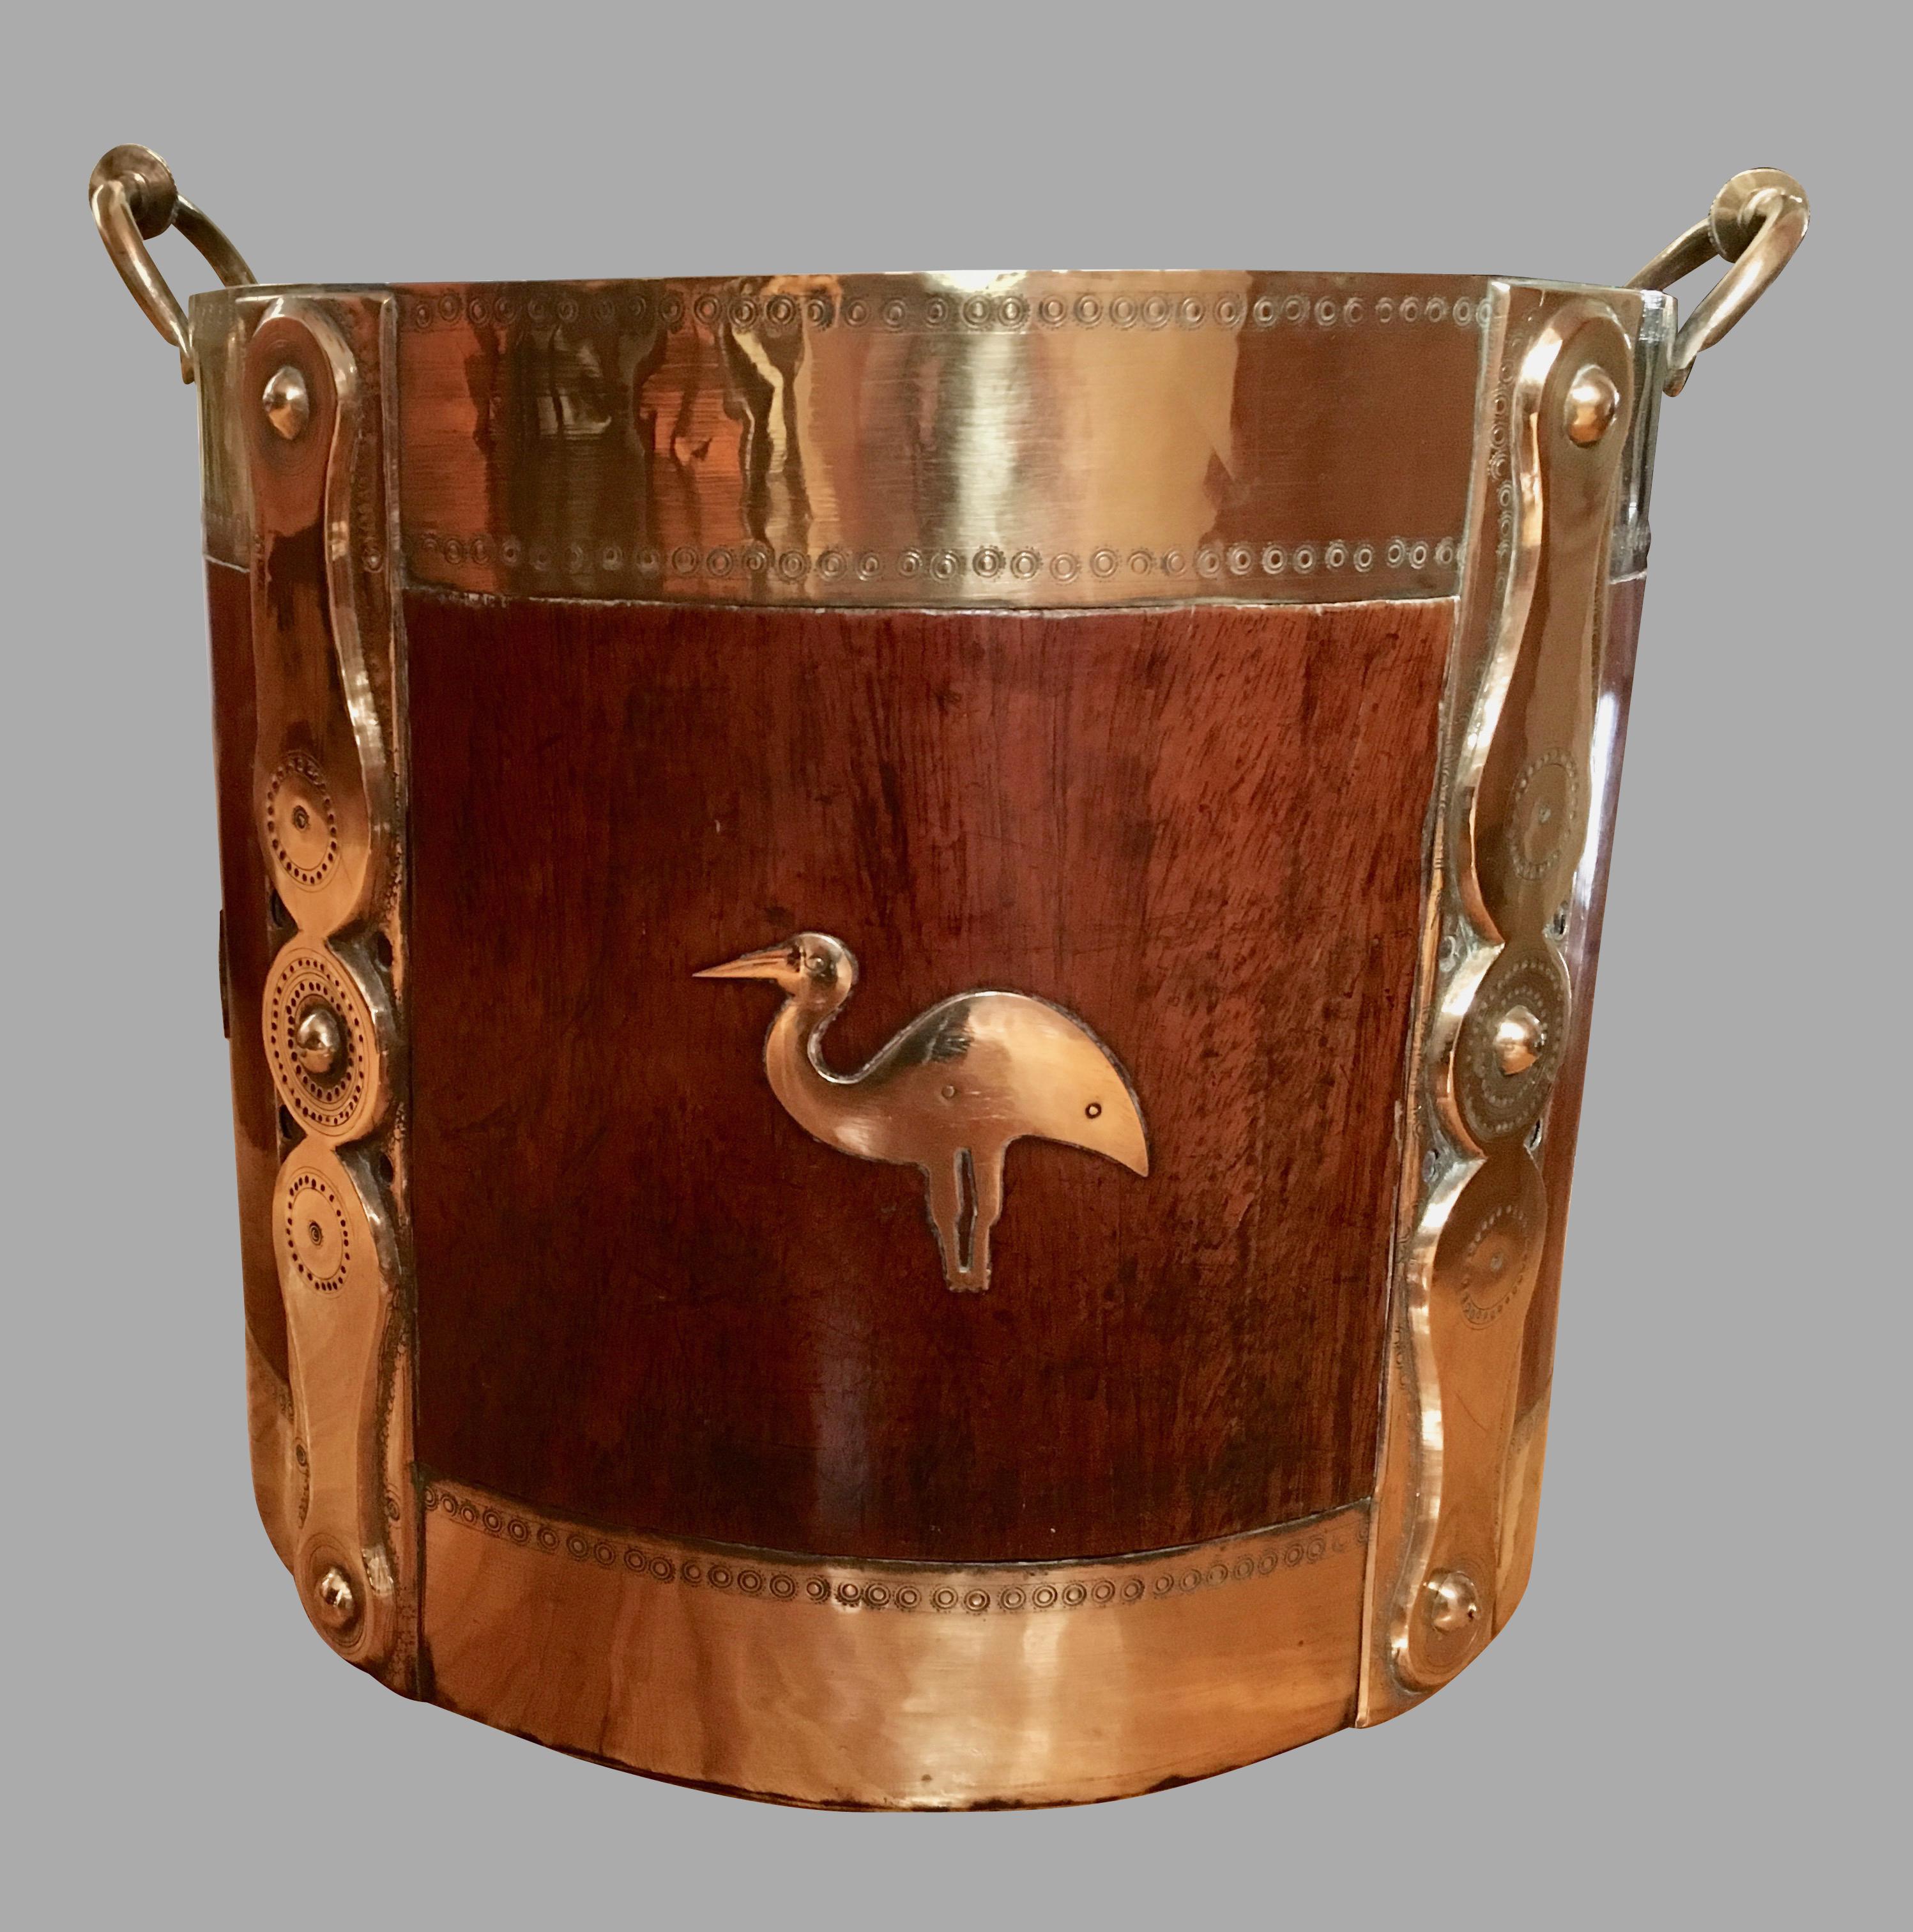 A rare pair of Anglo-Indian hardwood brass-mounted buckets with later metal inserts, the exterior decorated with cut brass applied fish, bird and lizard mounts, further decorated with vertical banding and brass carrying handles. 19th century.